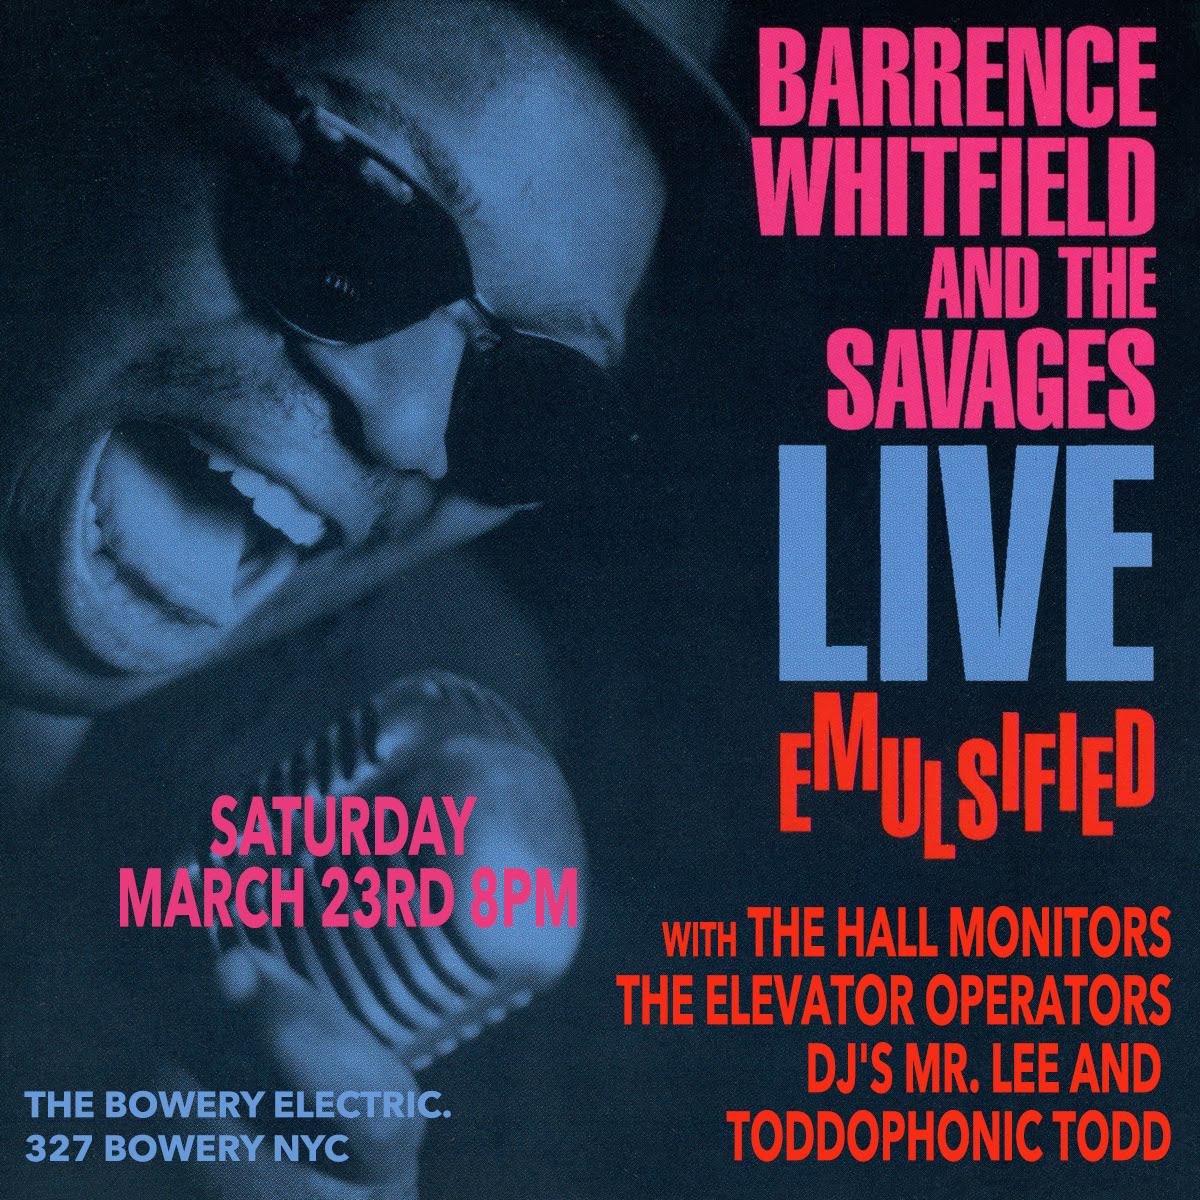 📣 @BarrenceWhitfld RETURNS TO NYC with The Hall Monitors & The Elevator Operators on MARCH 23rd ❗ DJ's Mr. Lee and Toddophonic are spinning before and after the show 📀 GET YOUR TICKETS NOW 🎟 ticketweb.com/event/barrence…